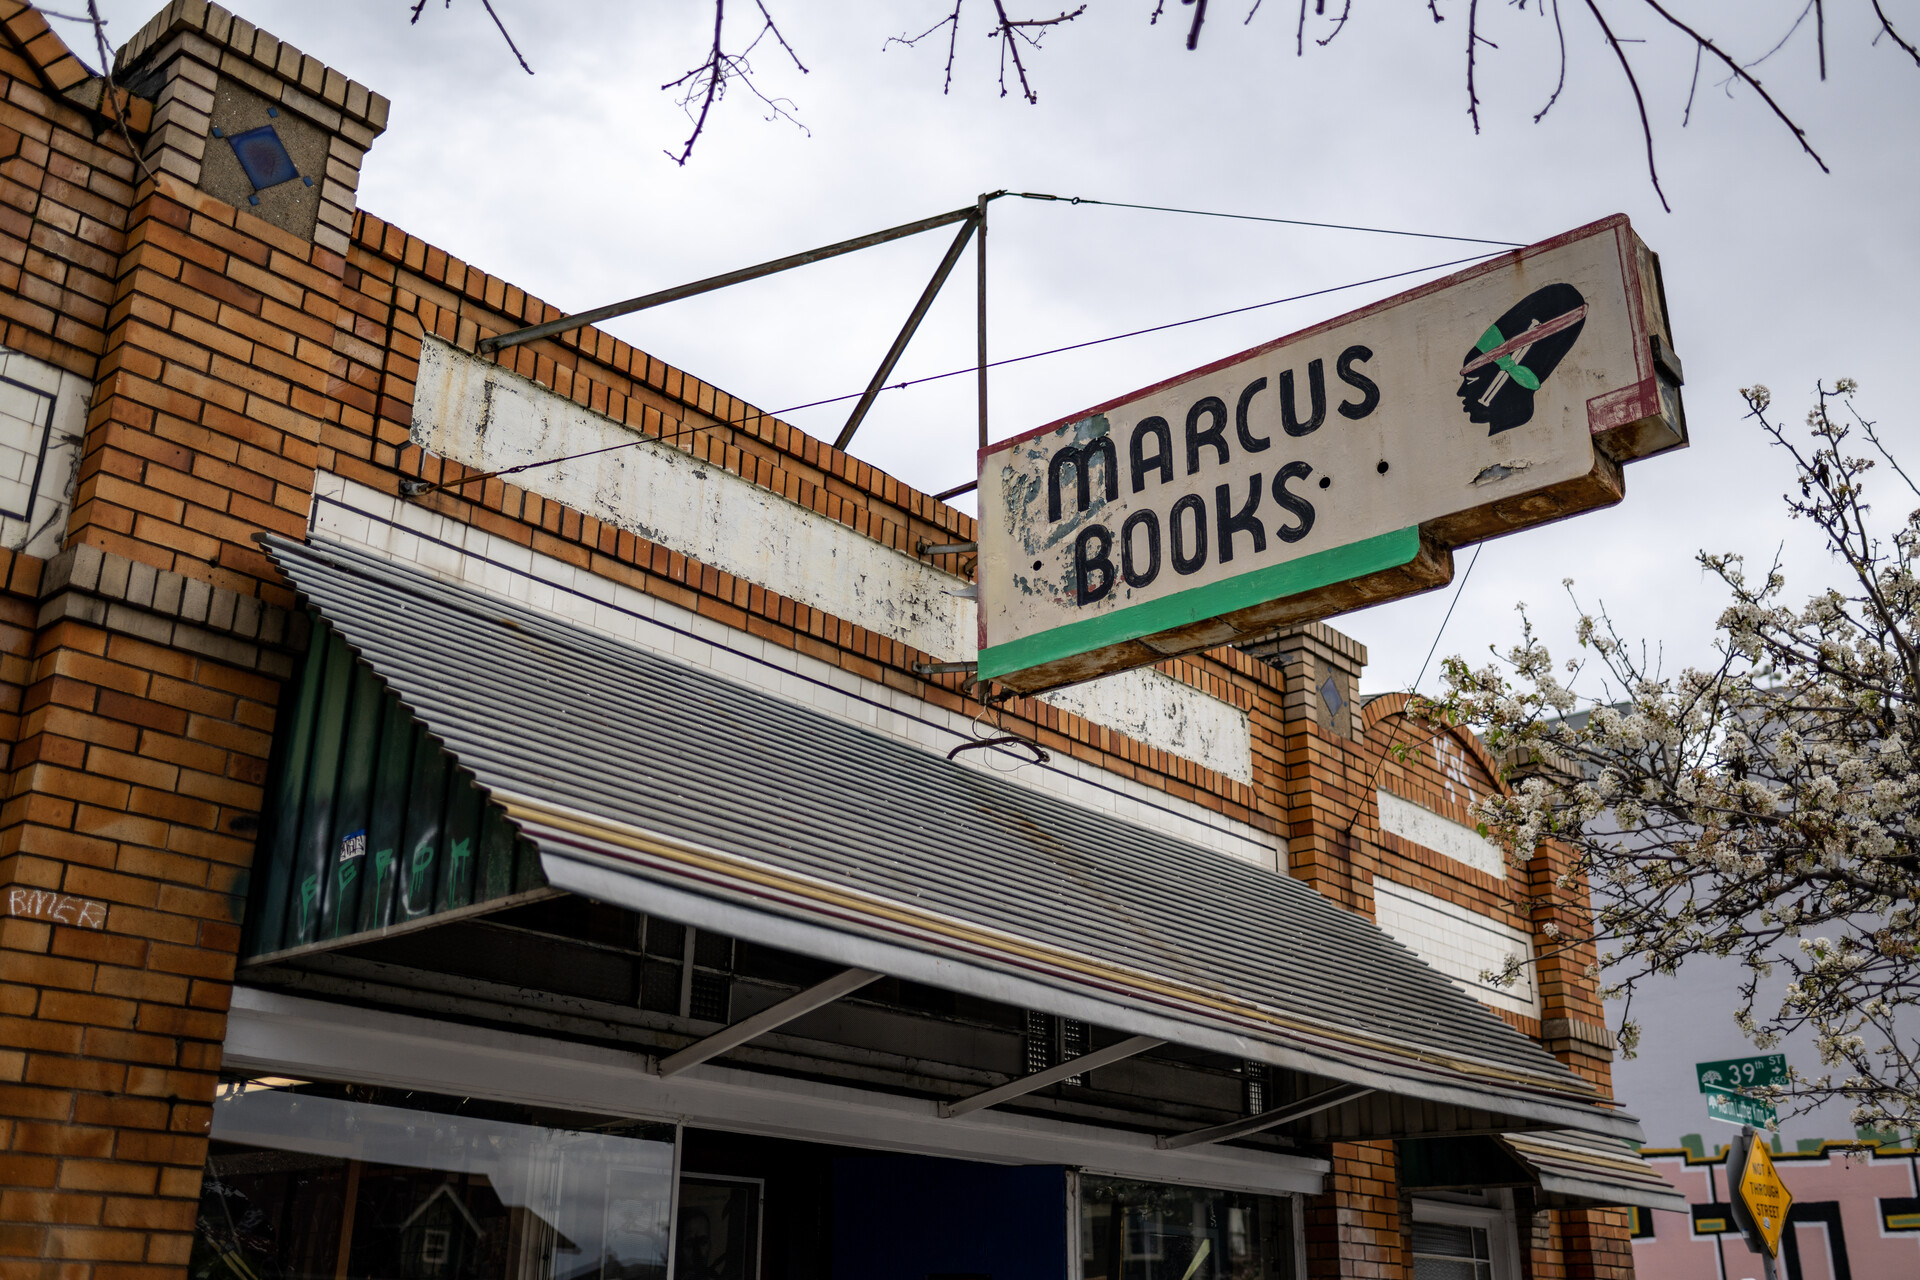 A sign hangs outside of a brick building reads "Marcus Books."